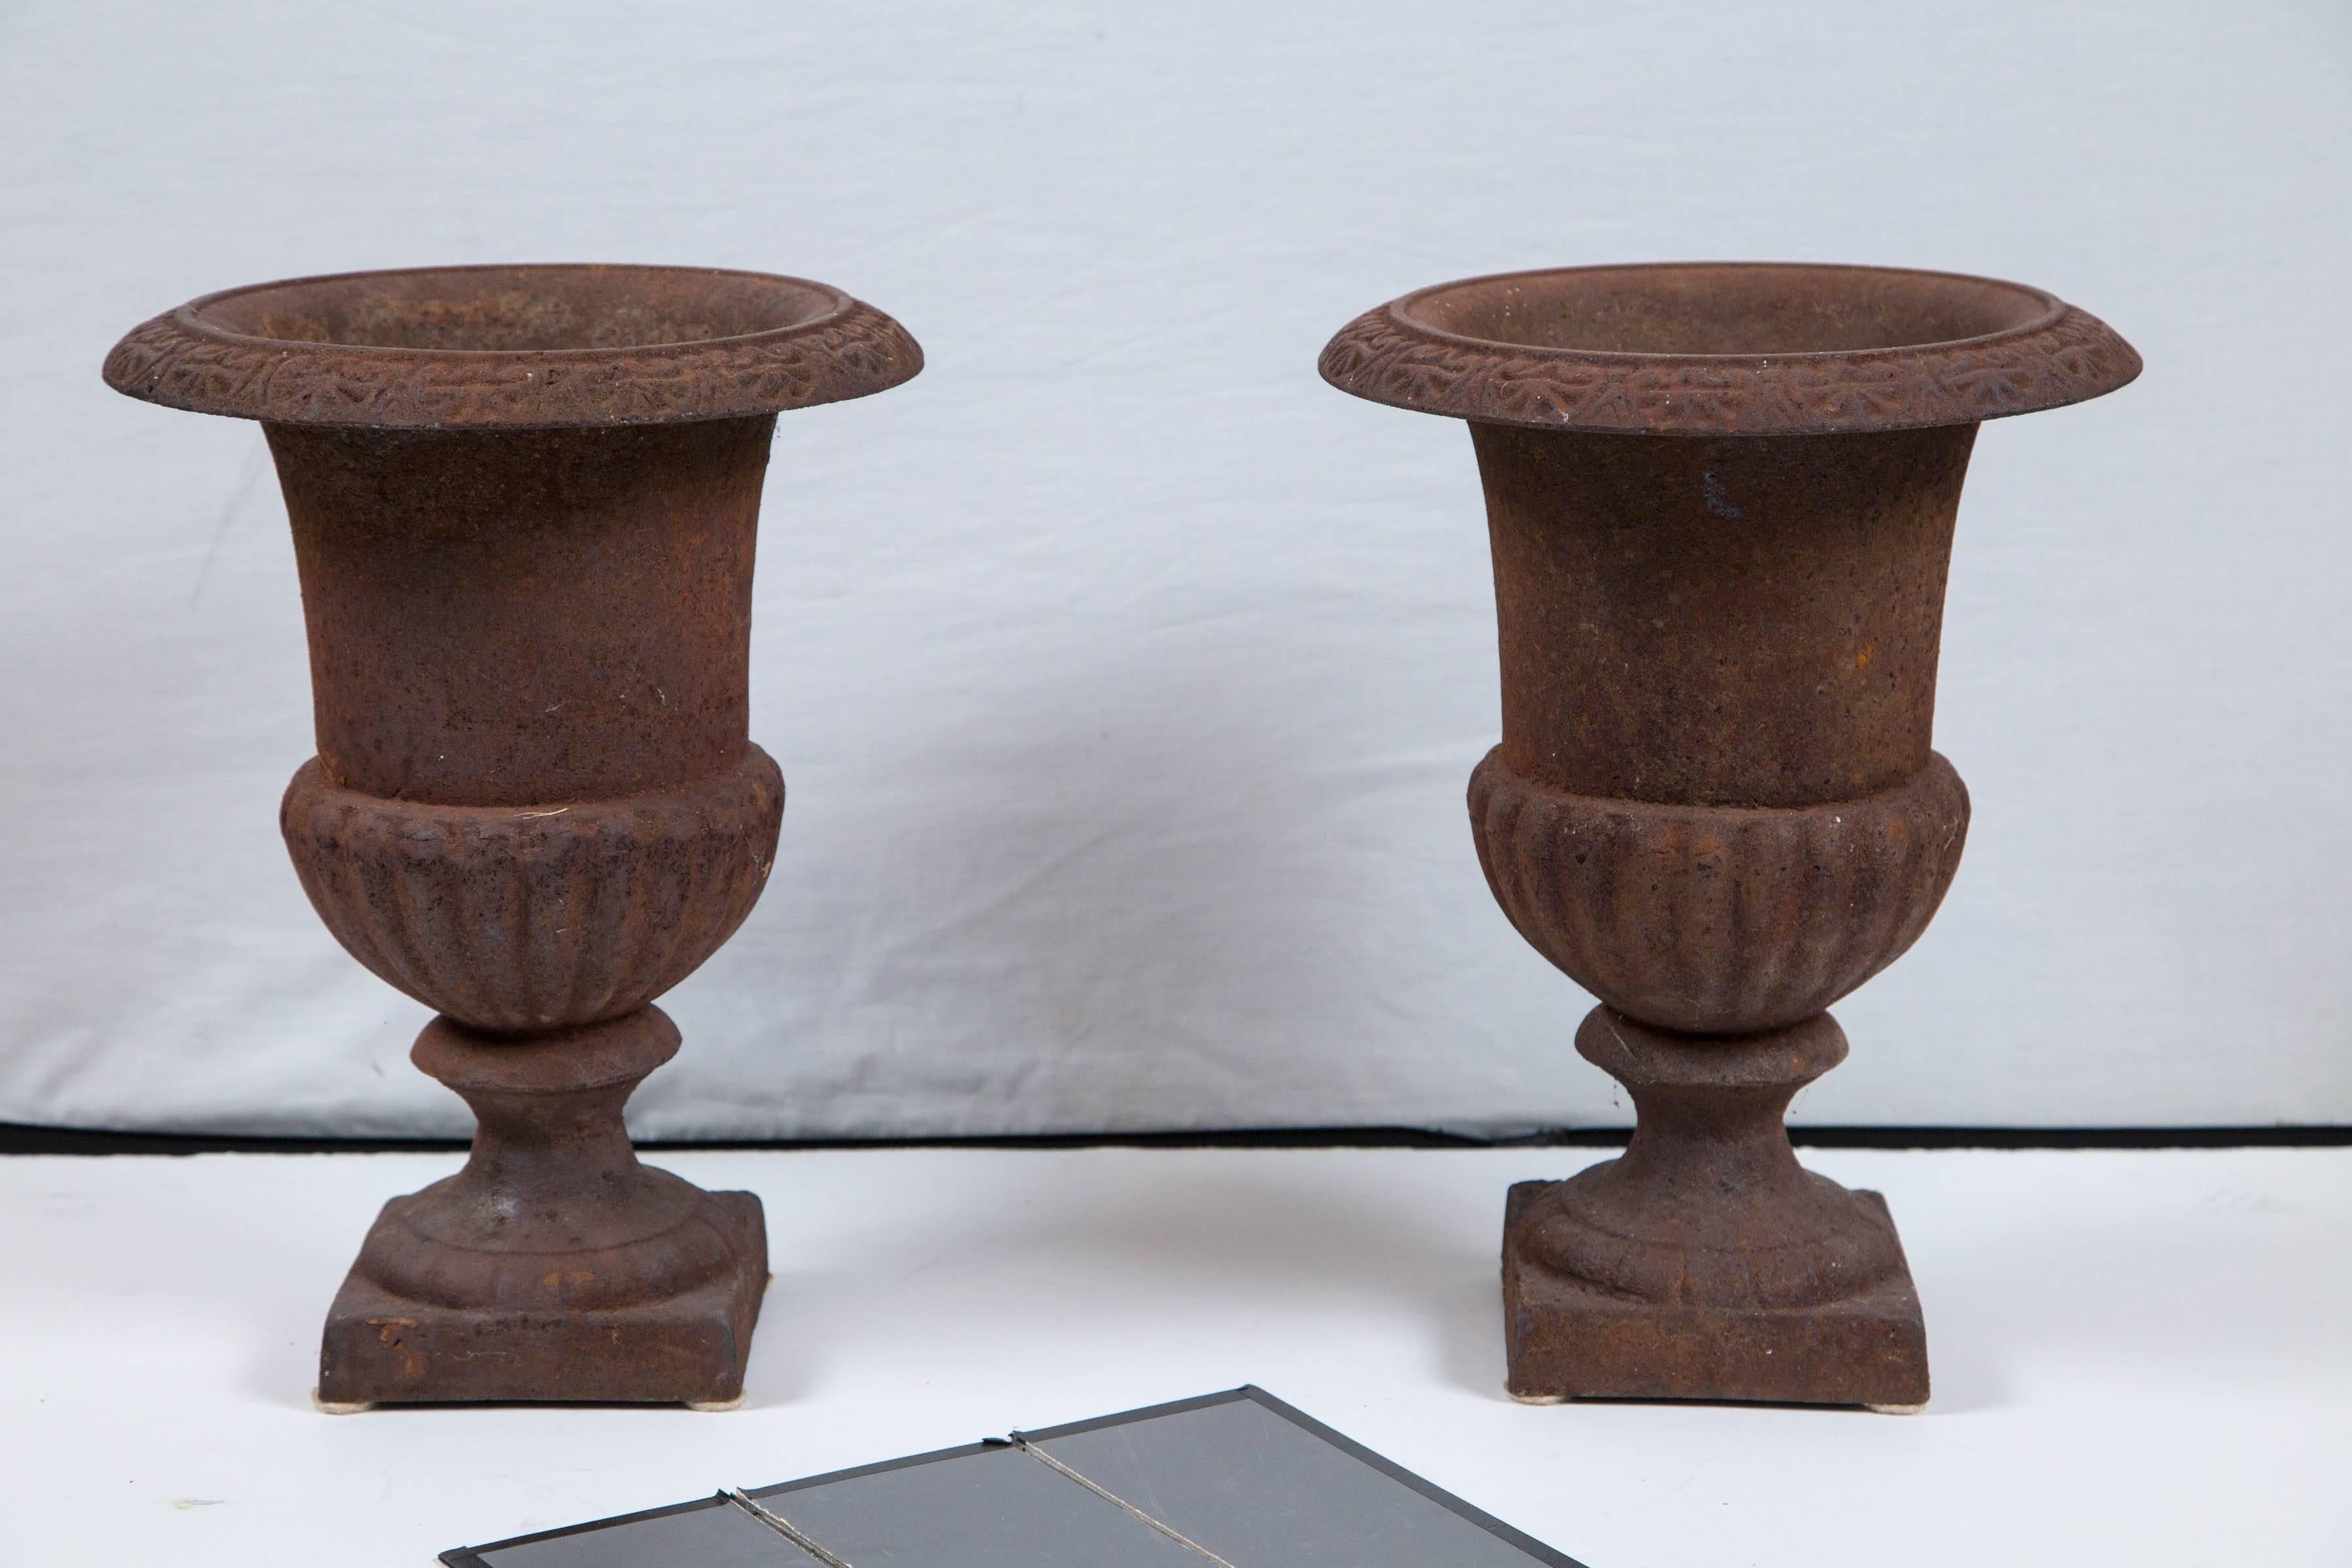 Pair of vintage cast iron planters, circa 1920. Great shape and details with weathered and aged patina.